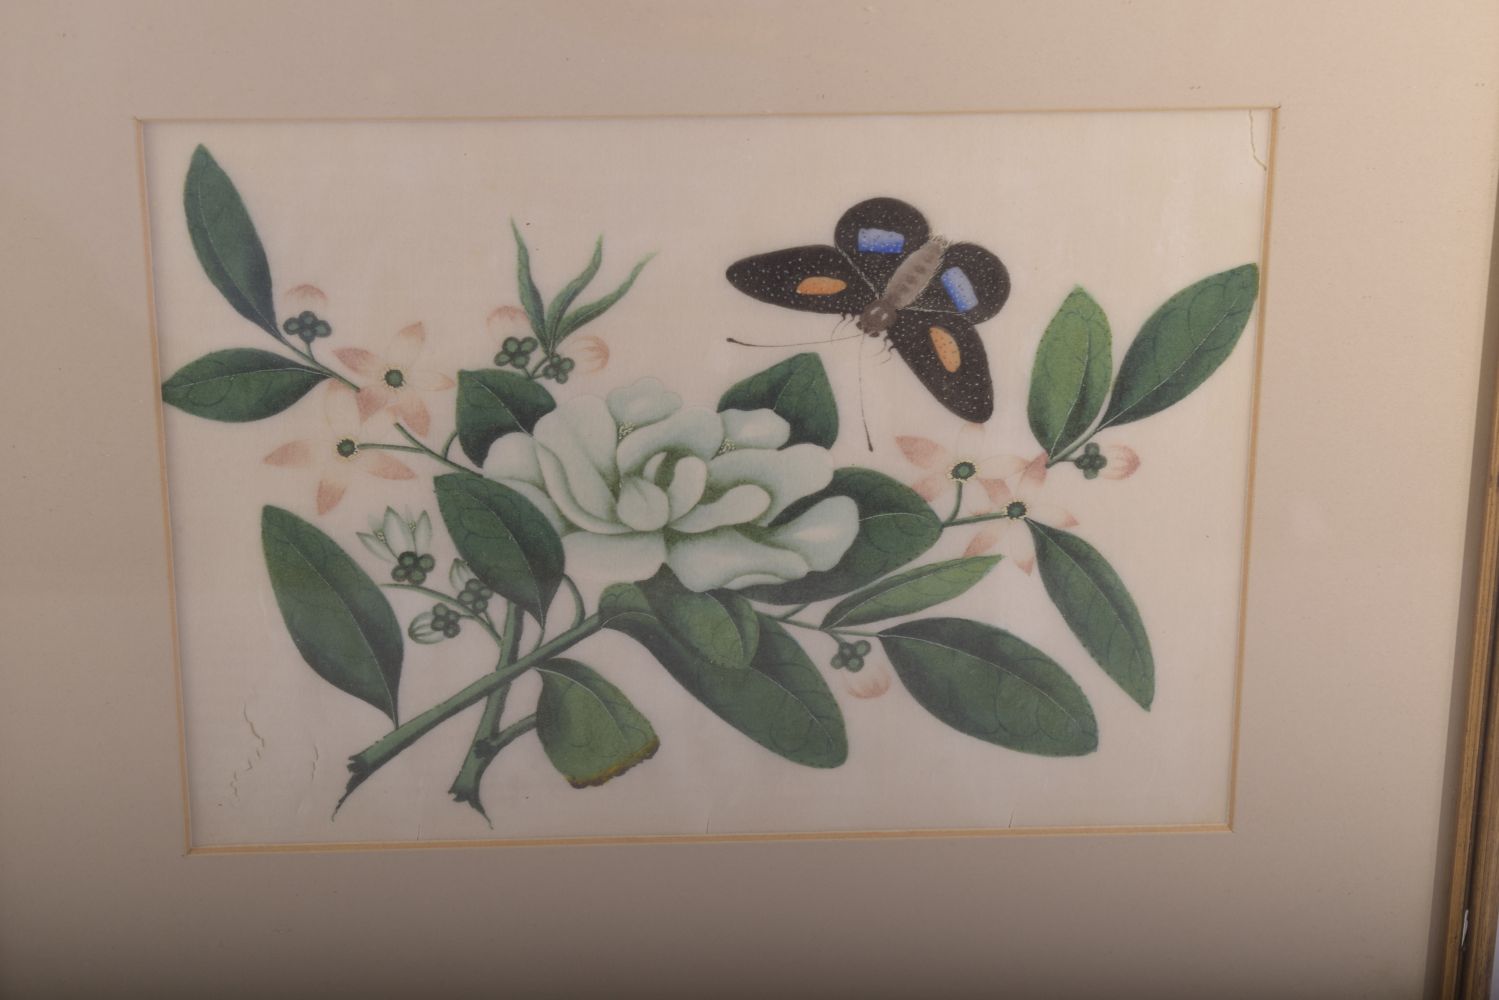 A PAIR OF FRAMED AND GLAZED CHINESE PITH PAINTINGS OF BUTTERFLIES amongst native flora, both - Image 2 of 4